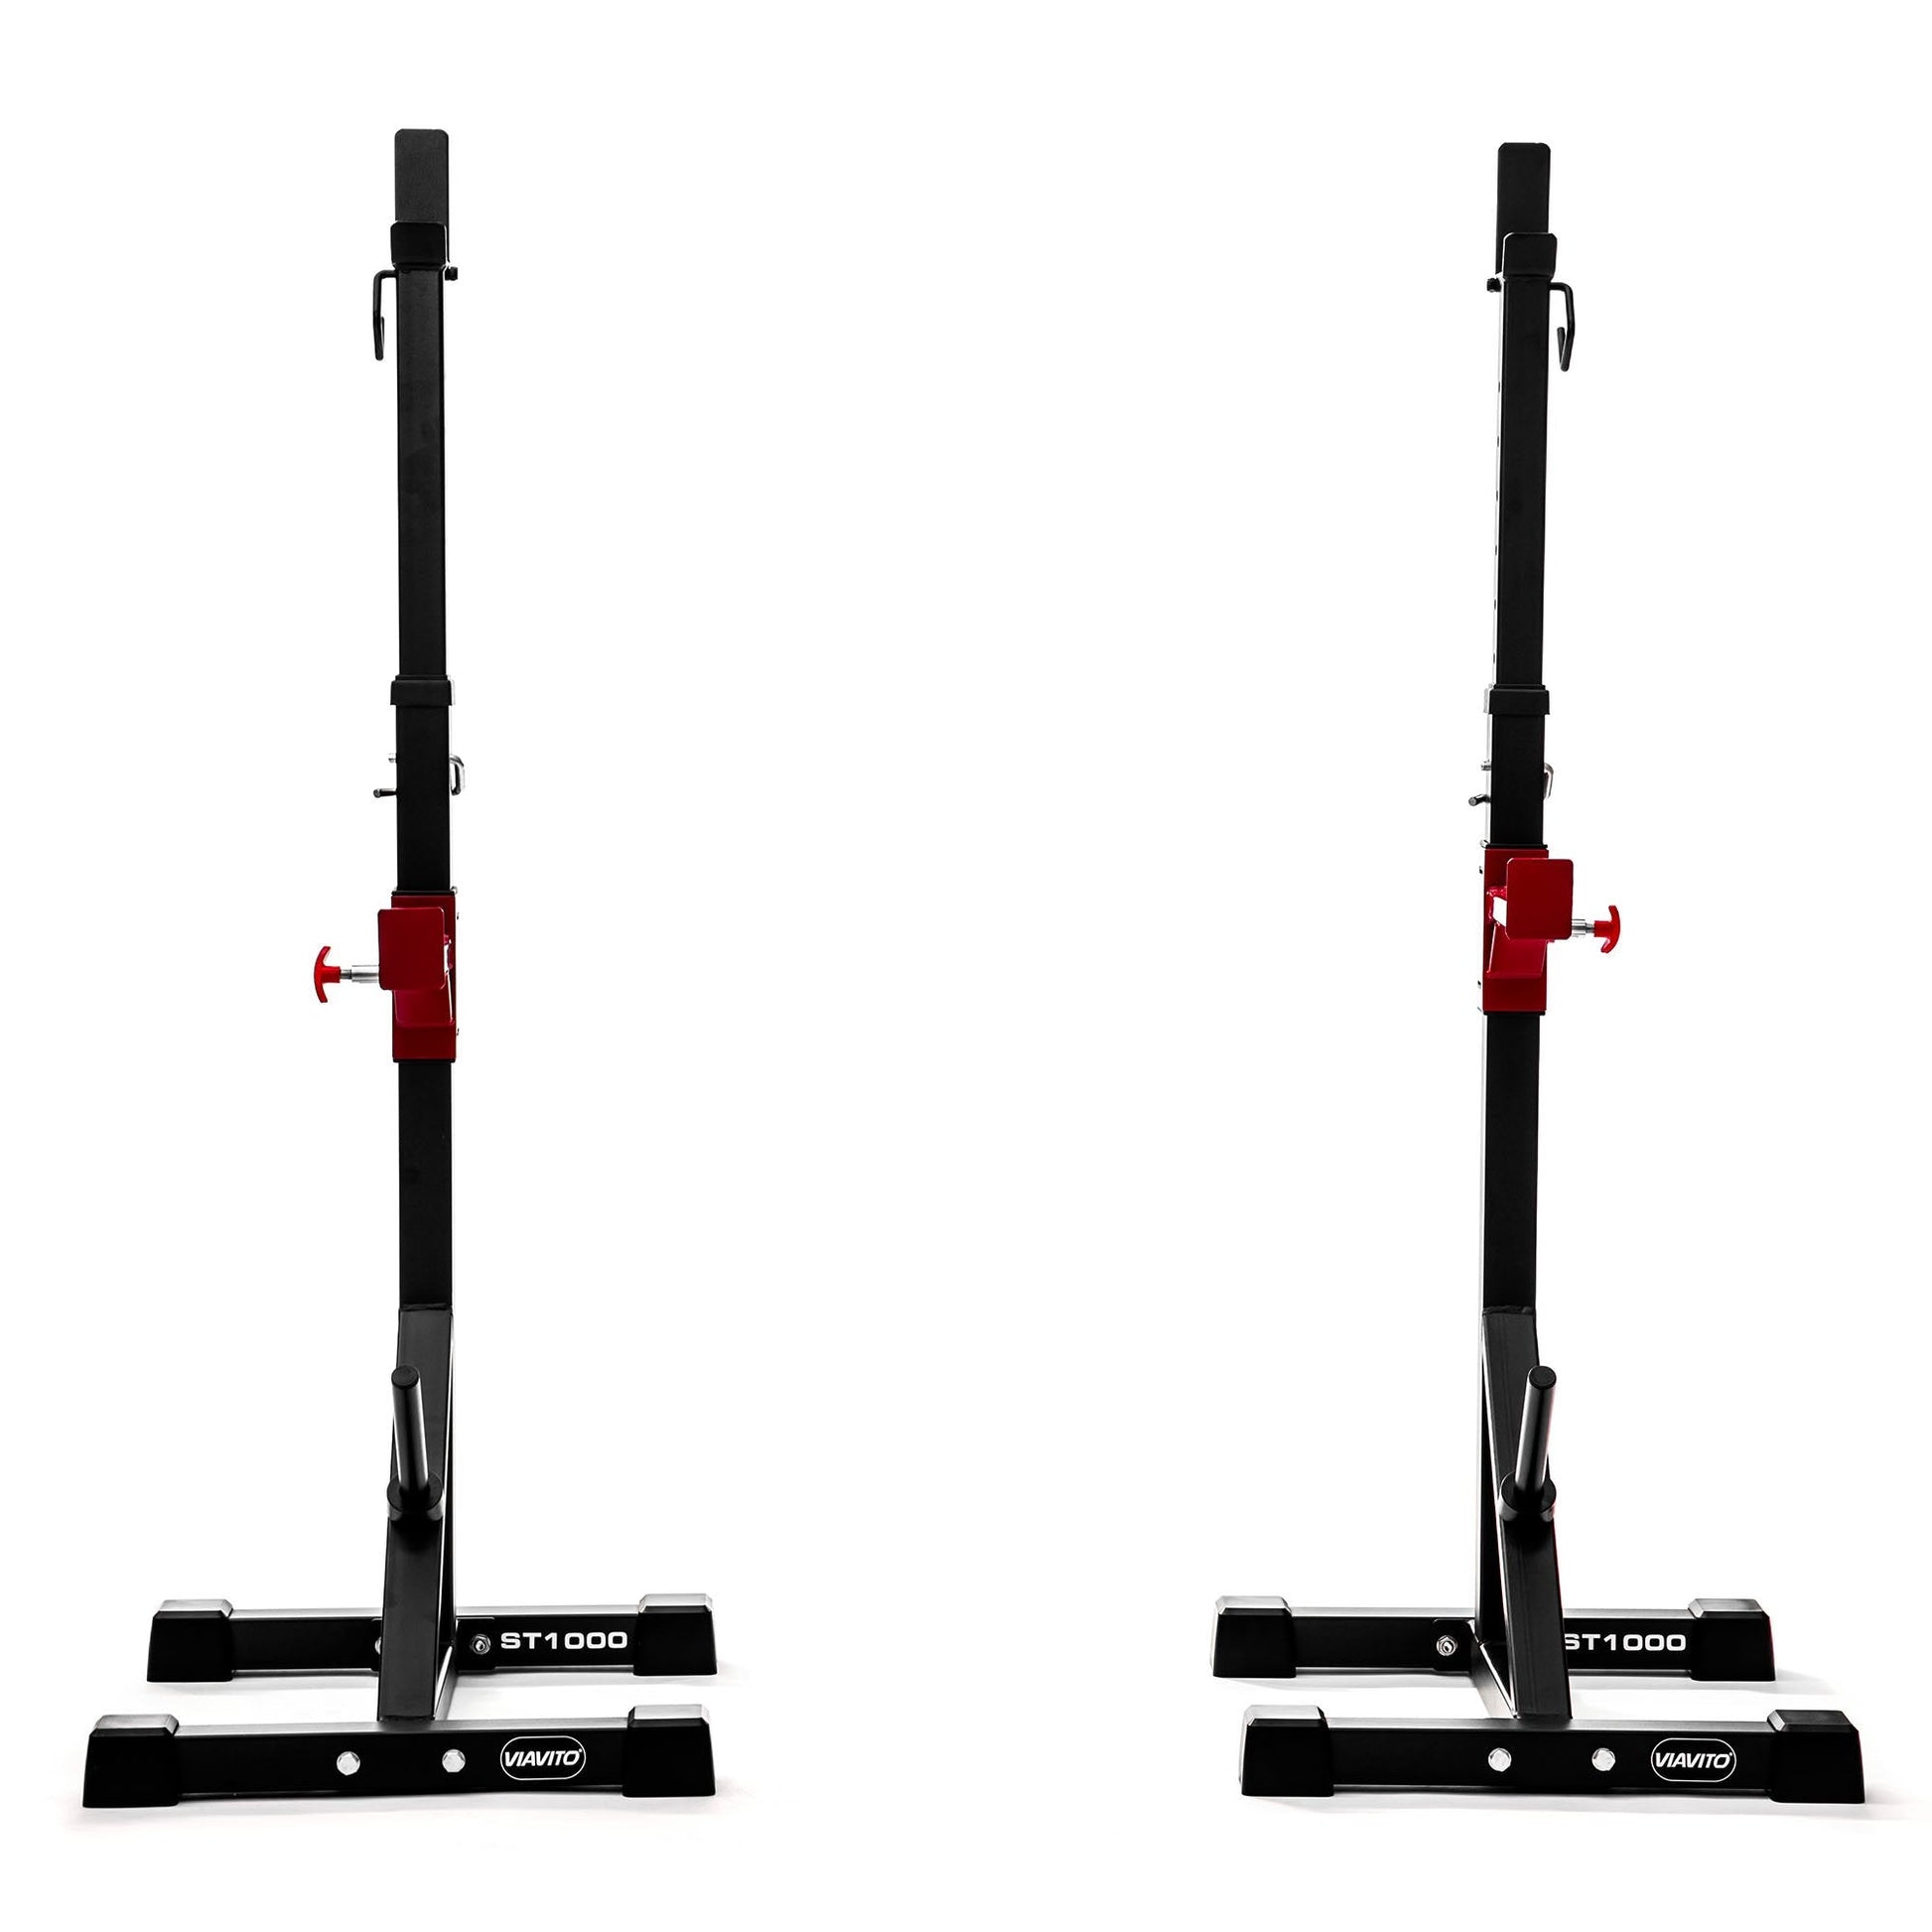 |Viavito ST1000 Adjustable Squat Stands with Barbell Spotter Catchers - Separated|